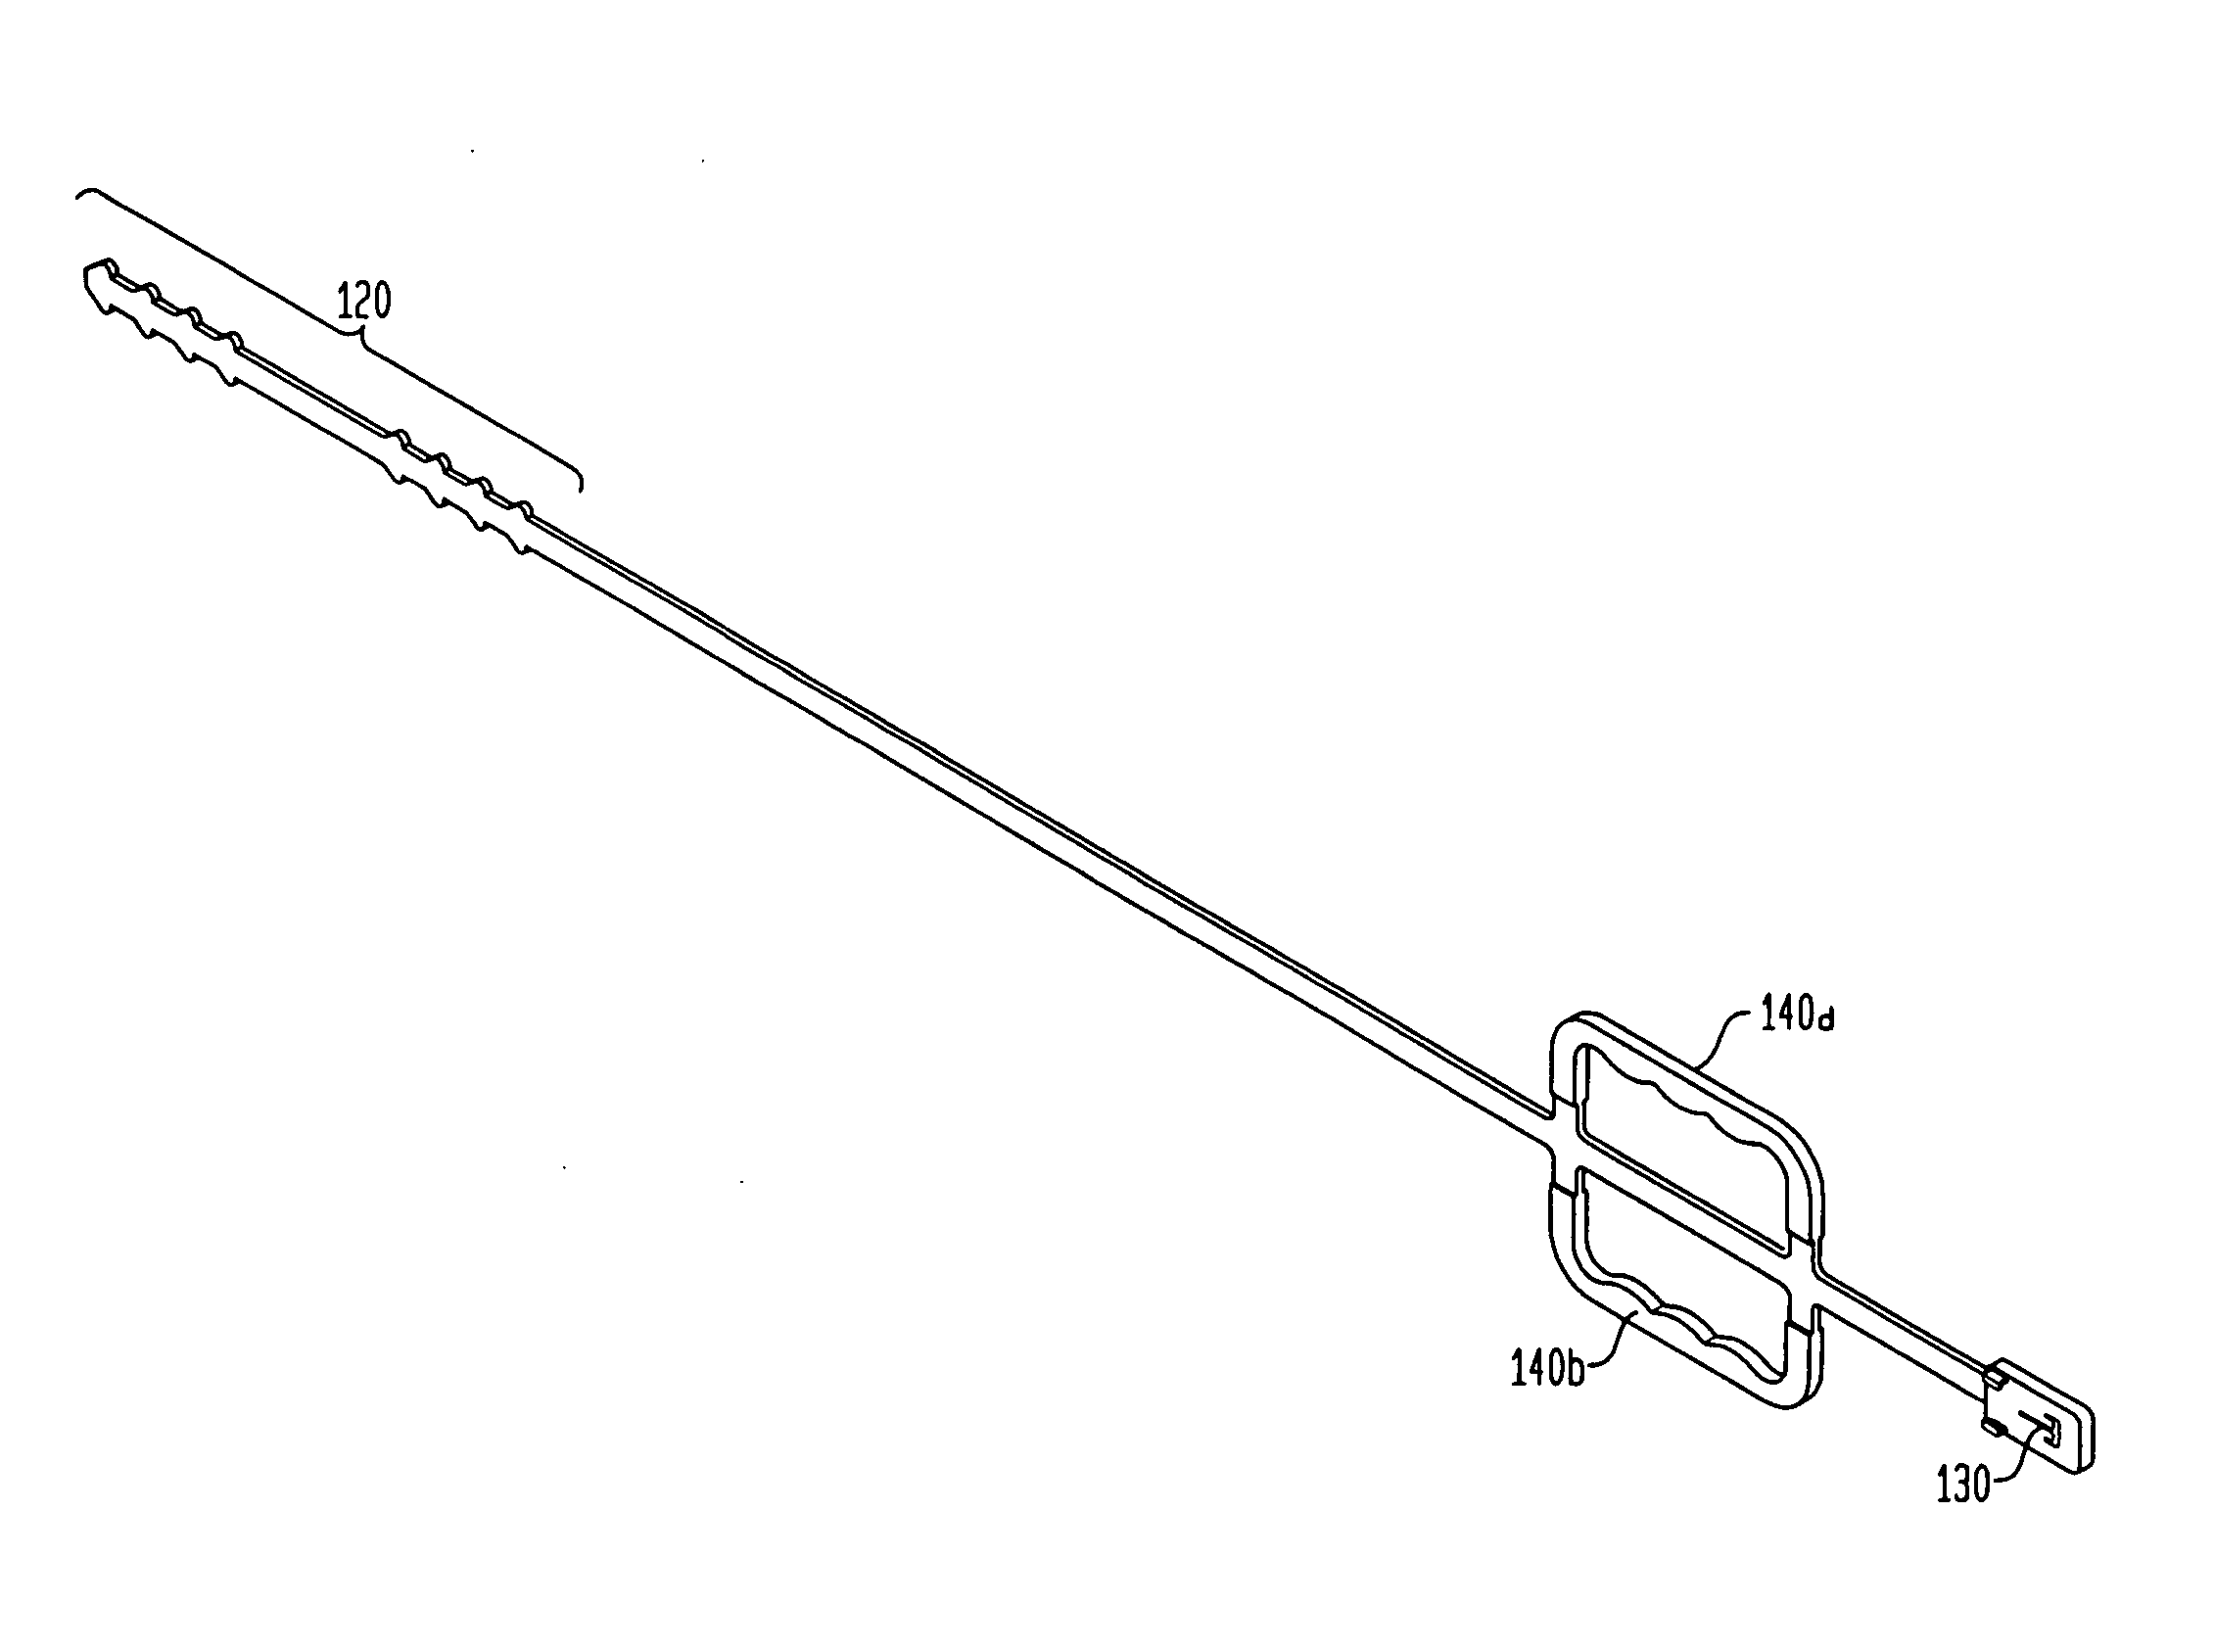 Adjustable plastic carry strap having laterally projecting foldable handles